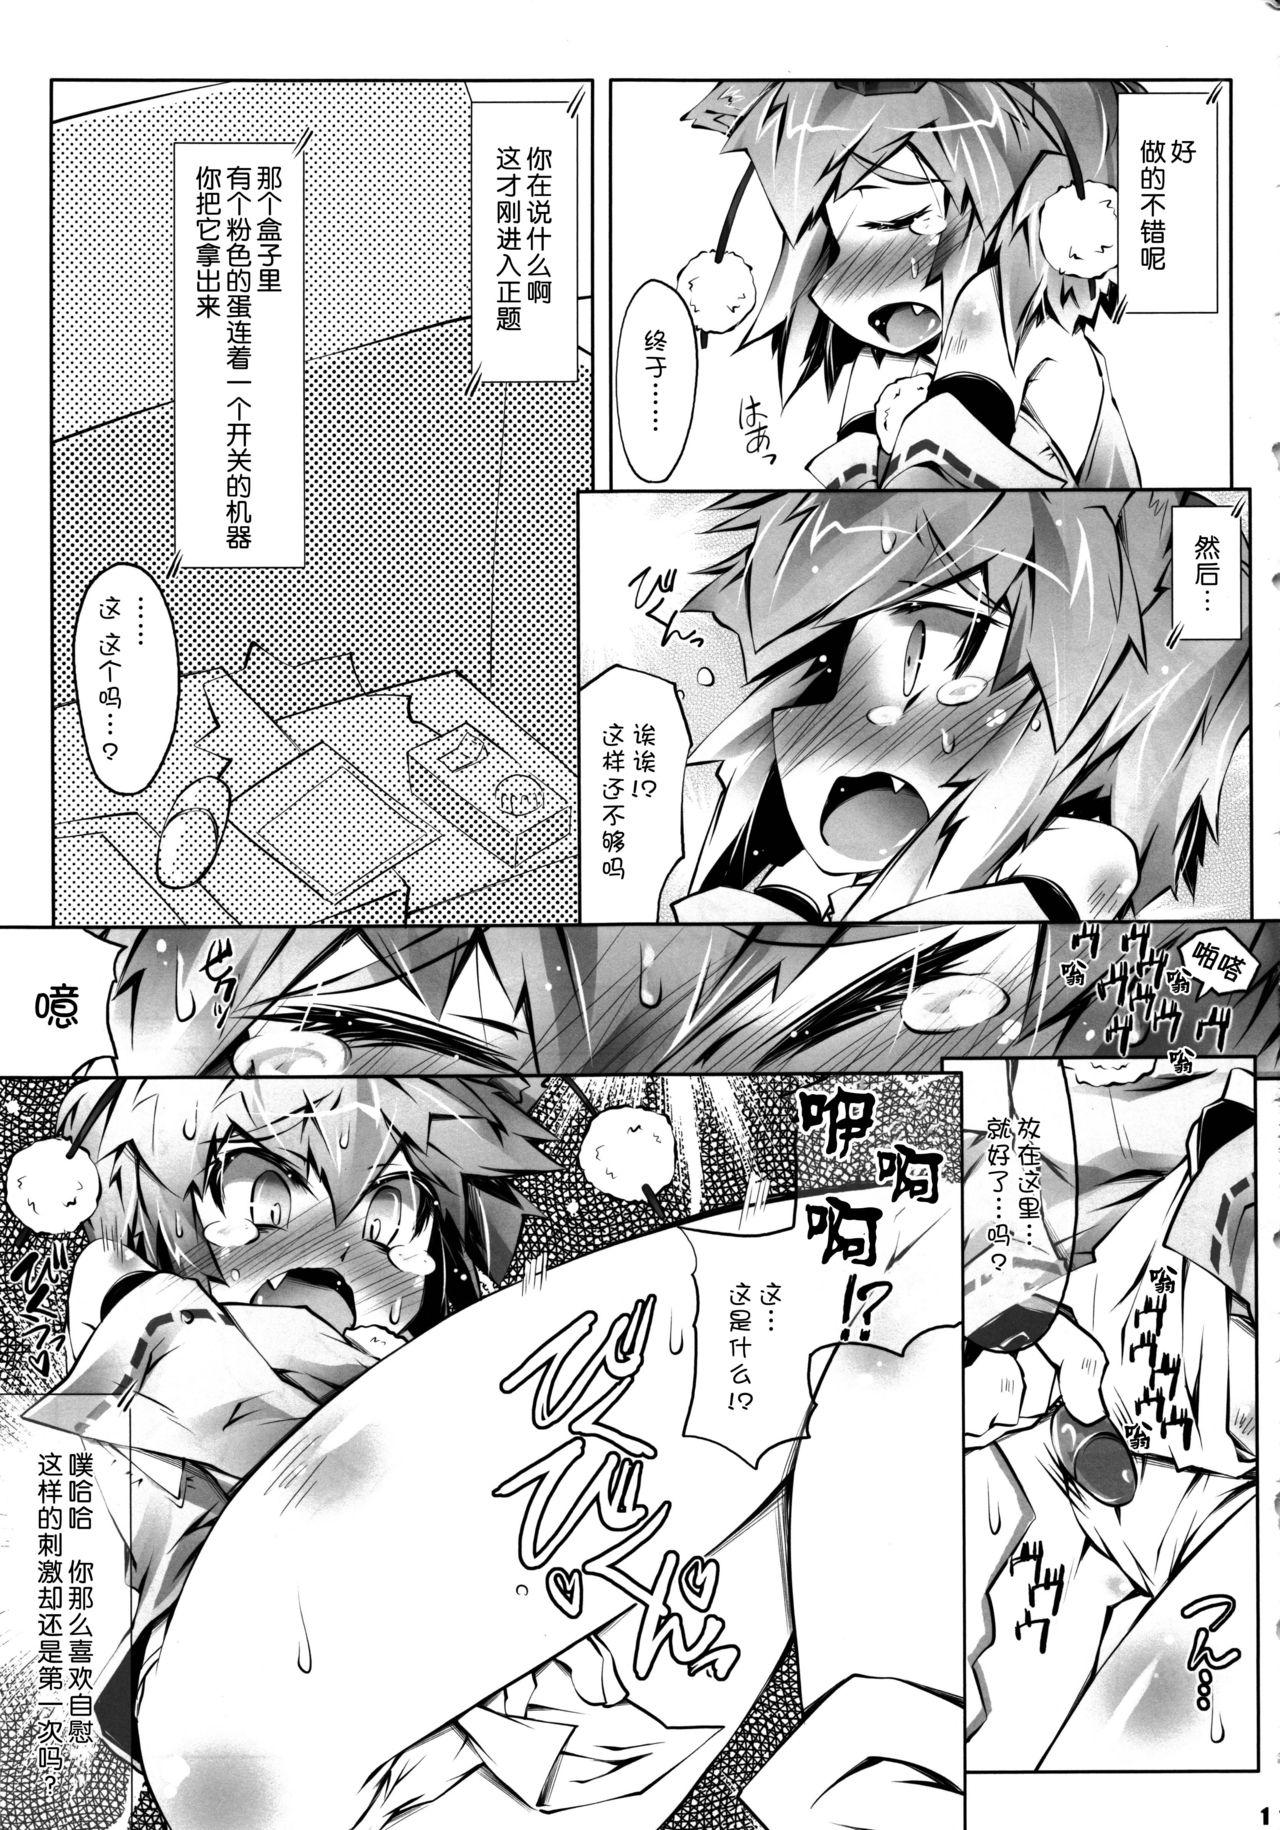 Orgy MOMI LOVE STAMPEDE - Touhou project Punishment - Page 12